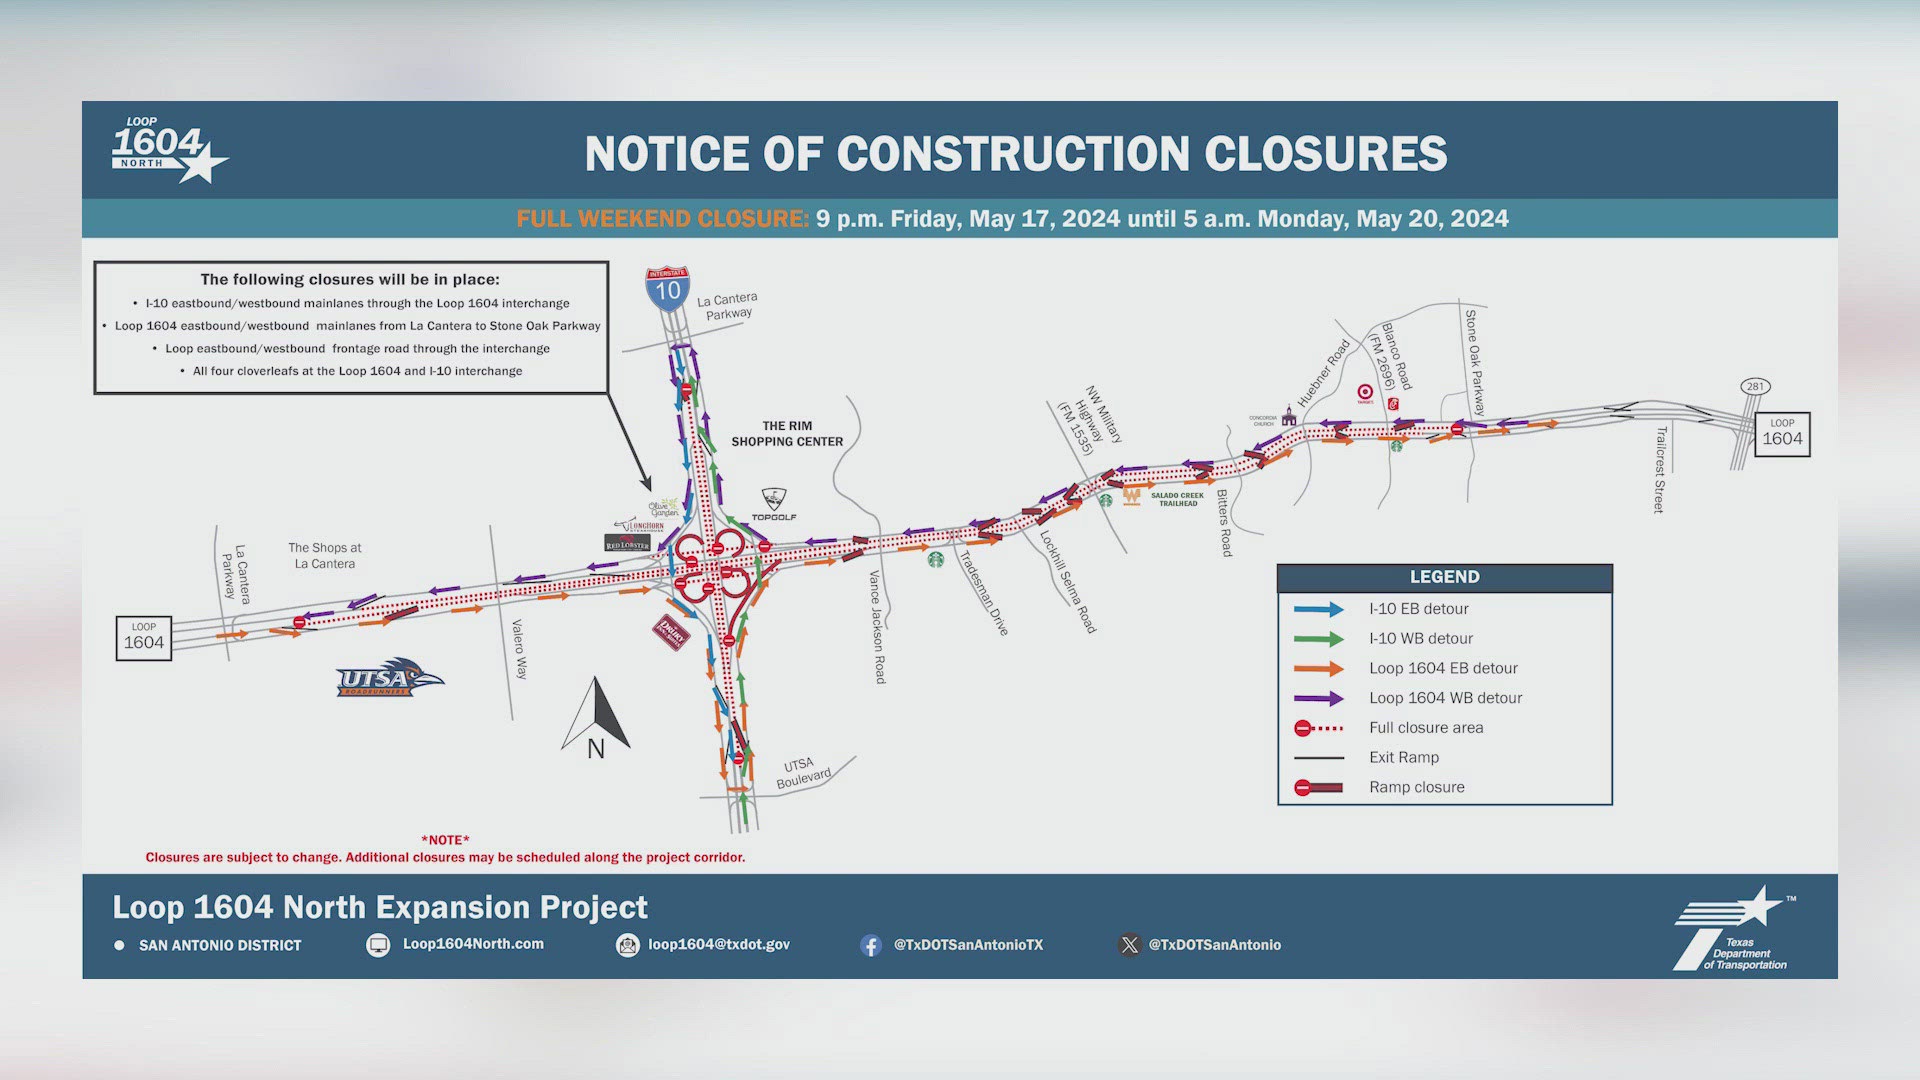 Starting at 9 p.m. on Friday, Loop 1604 will be shut down in both directions from La Cantera Parkway to Stone Oak Parkway.